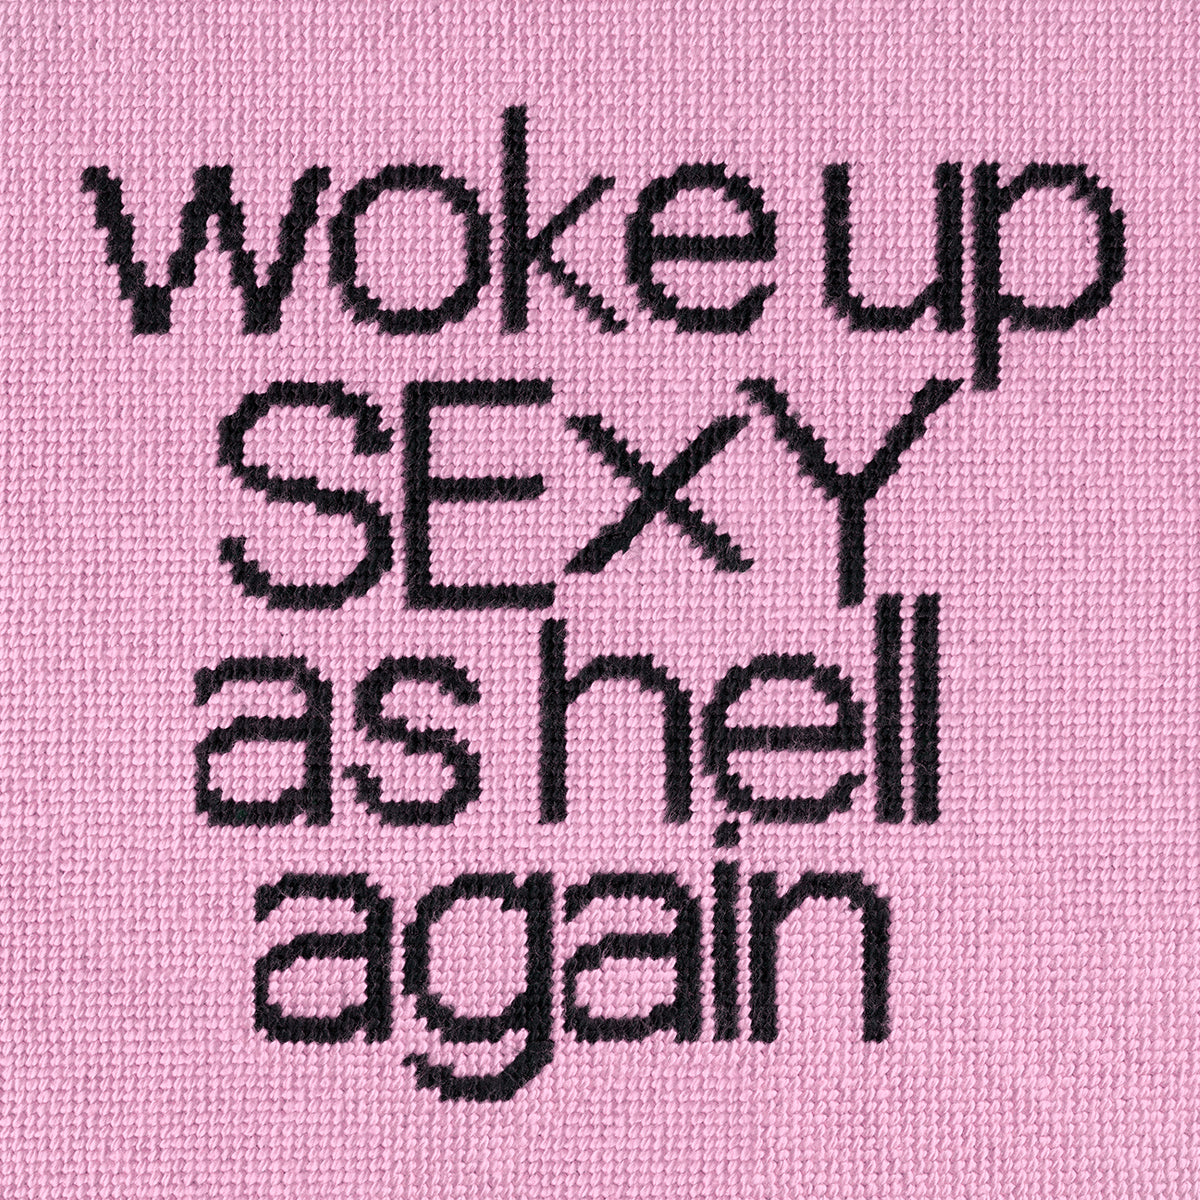 woke up sexy as hell in black, centered on pillow with pink background